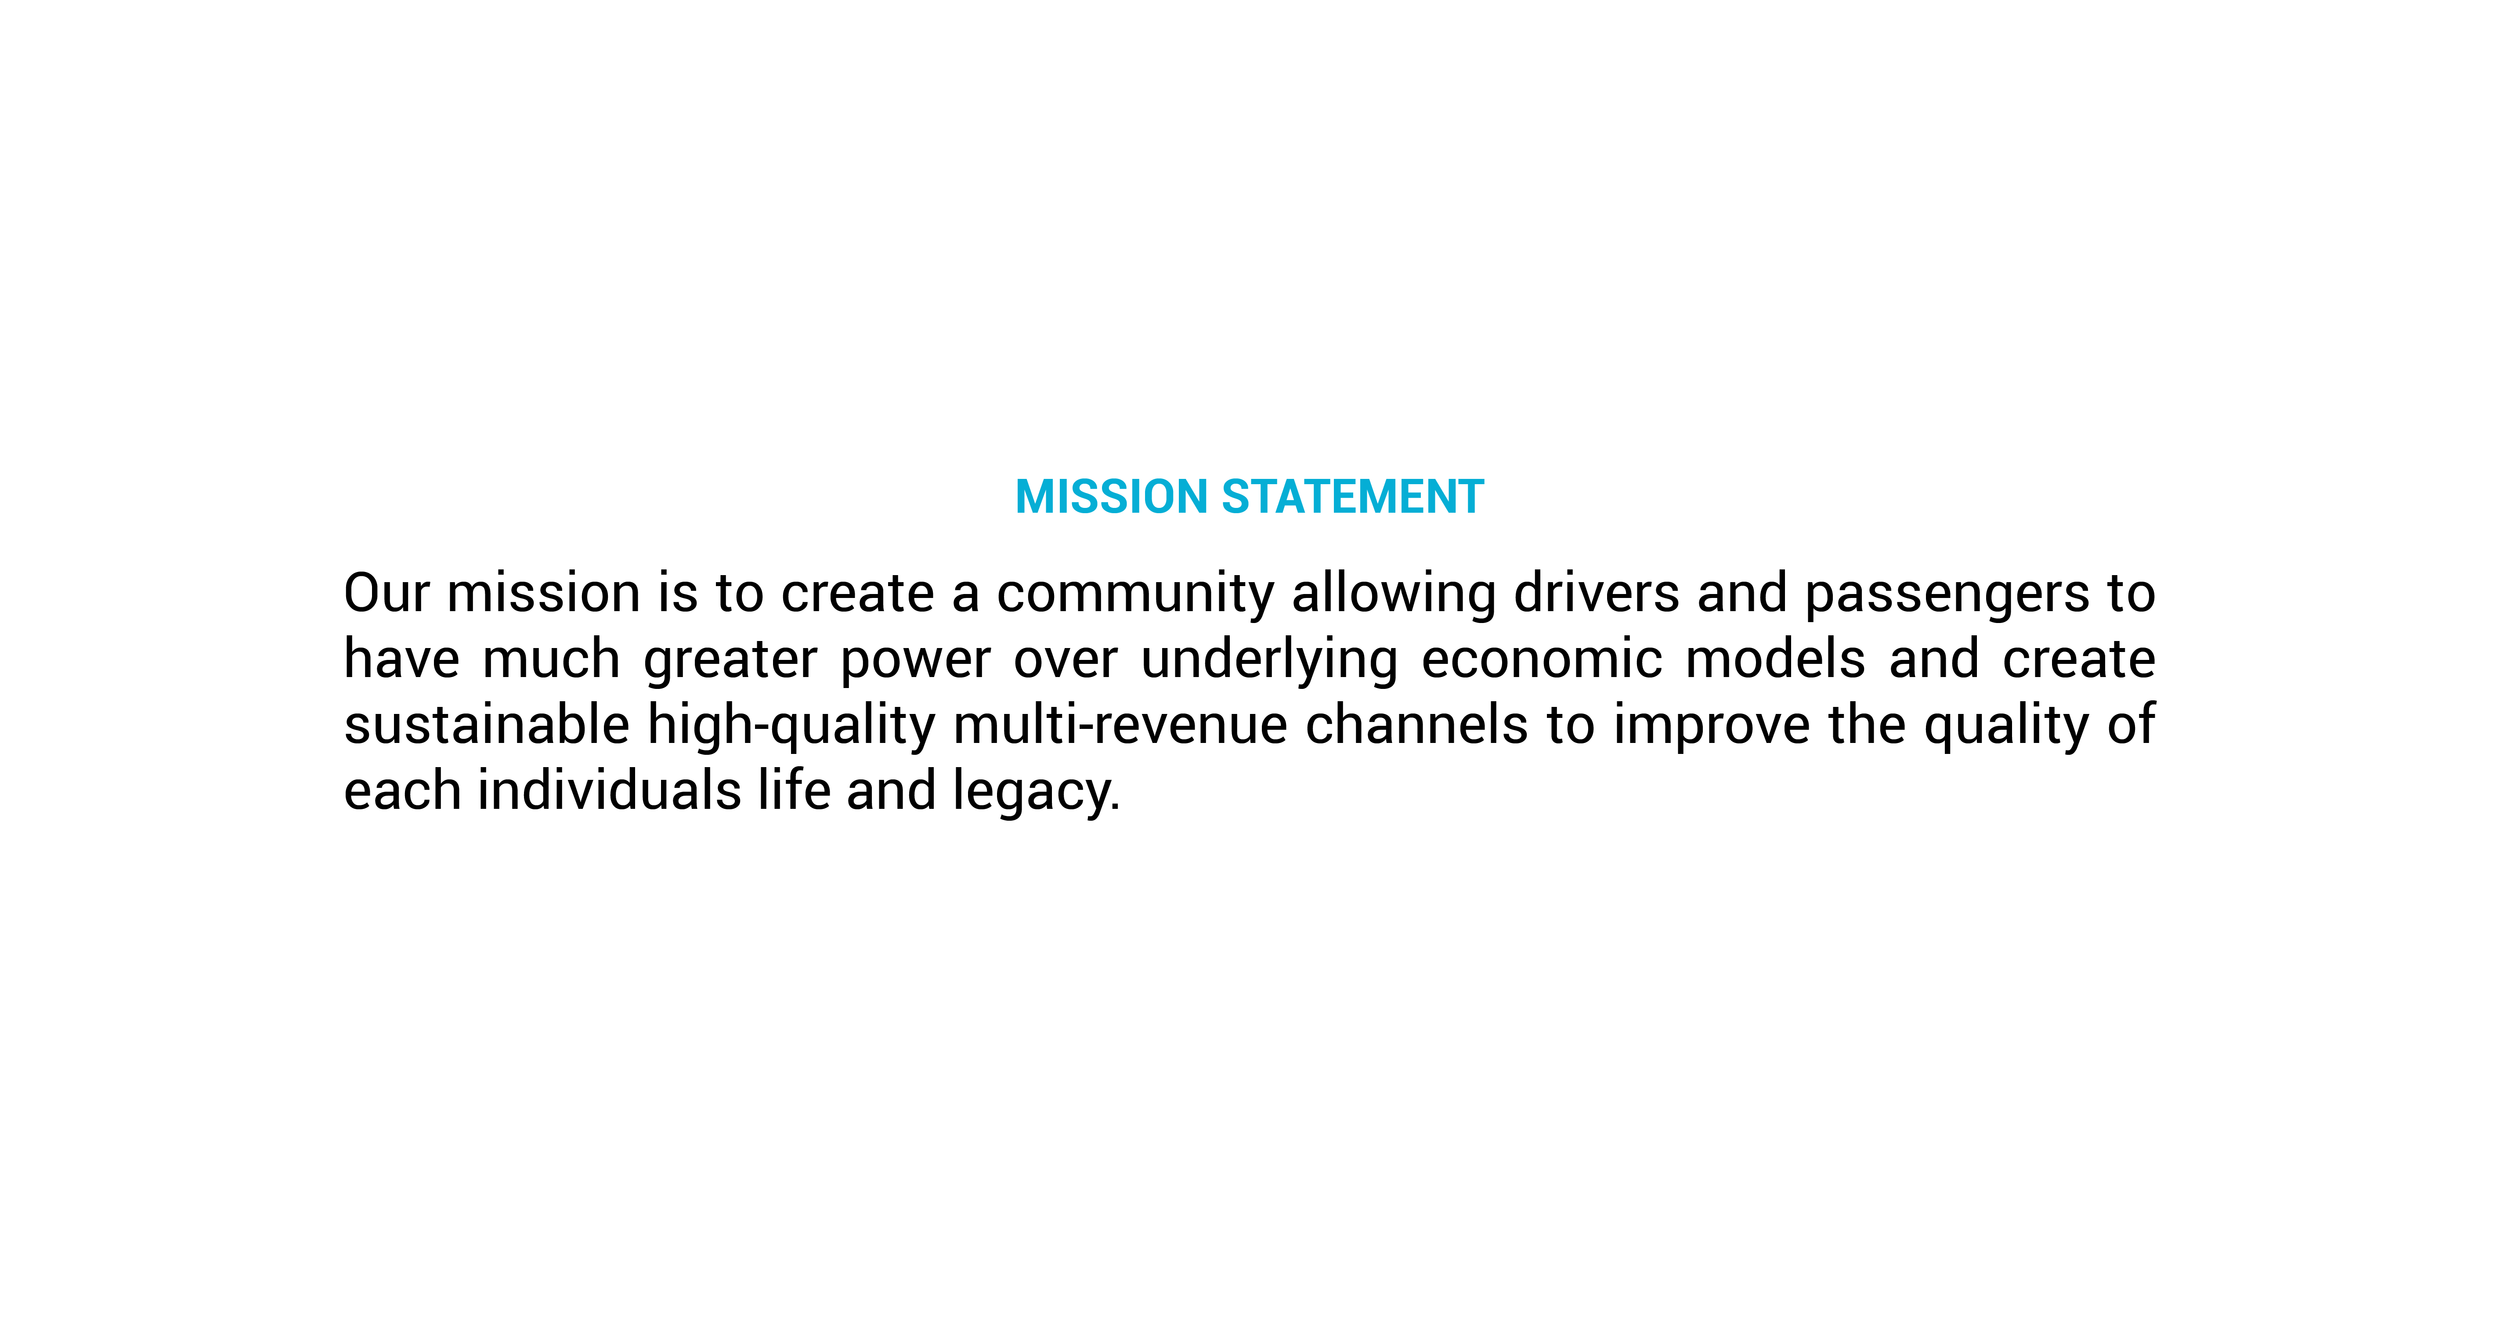 DACSEE_Page02_MissionStatement-01.png